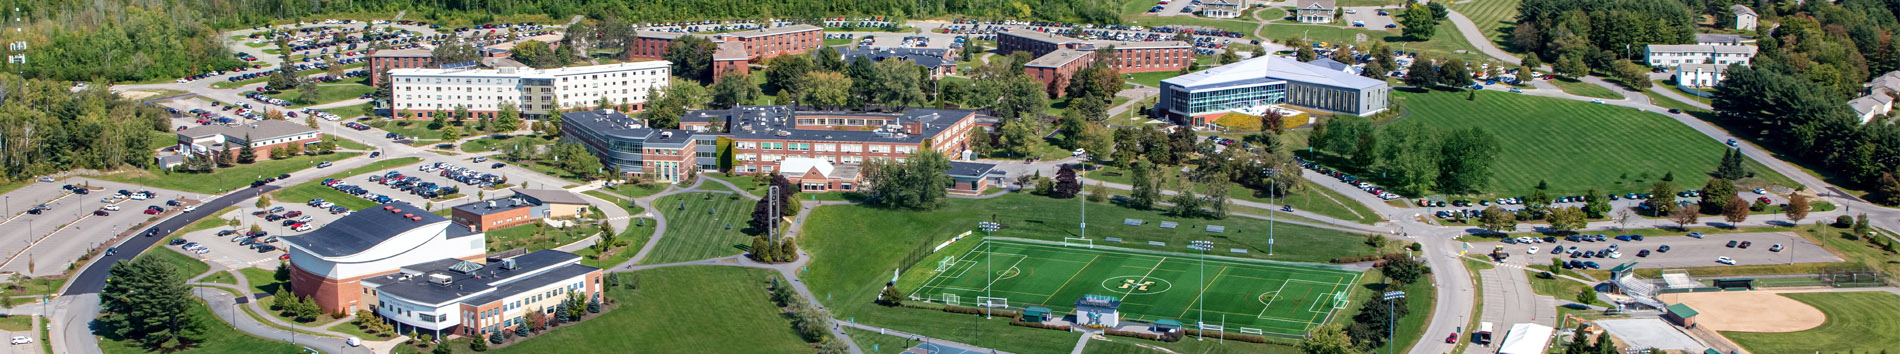 aerial photo of Husson University campus